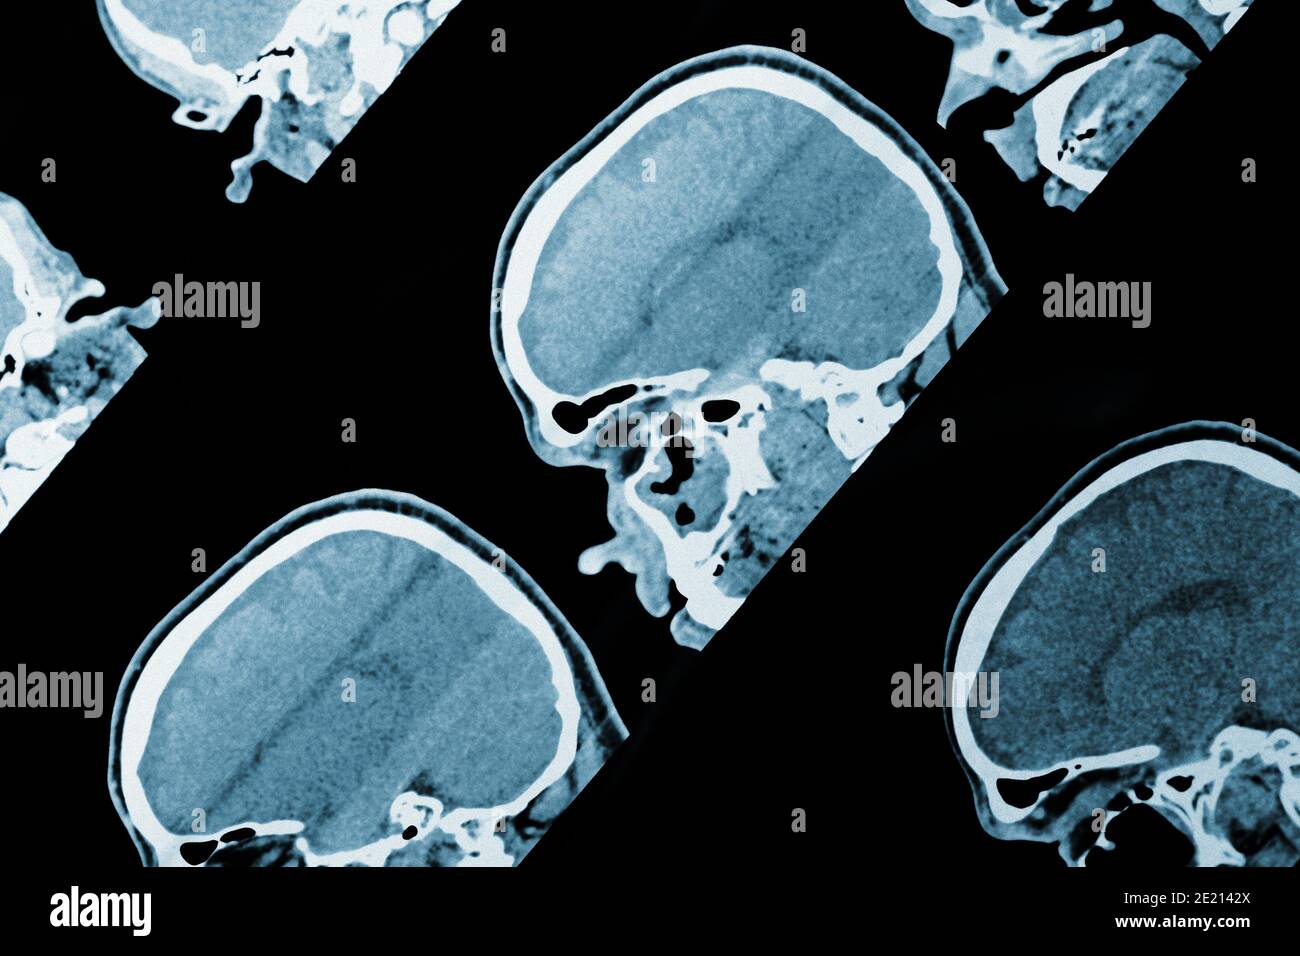 MRI scan image of head as medical background. Stock Photo